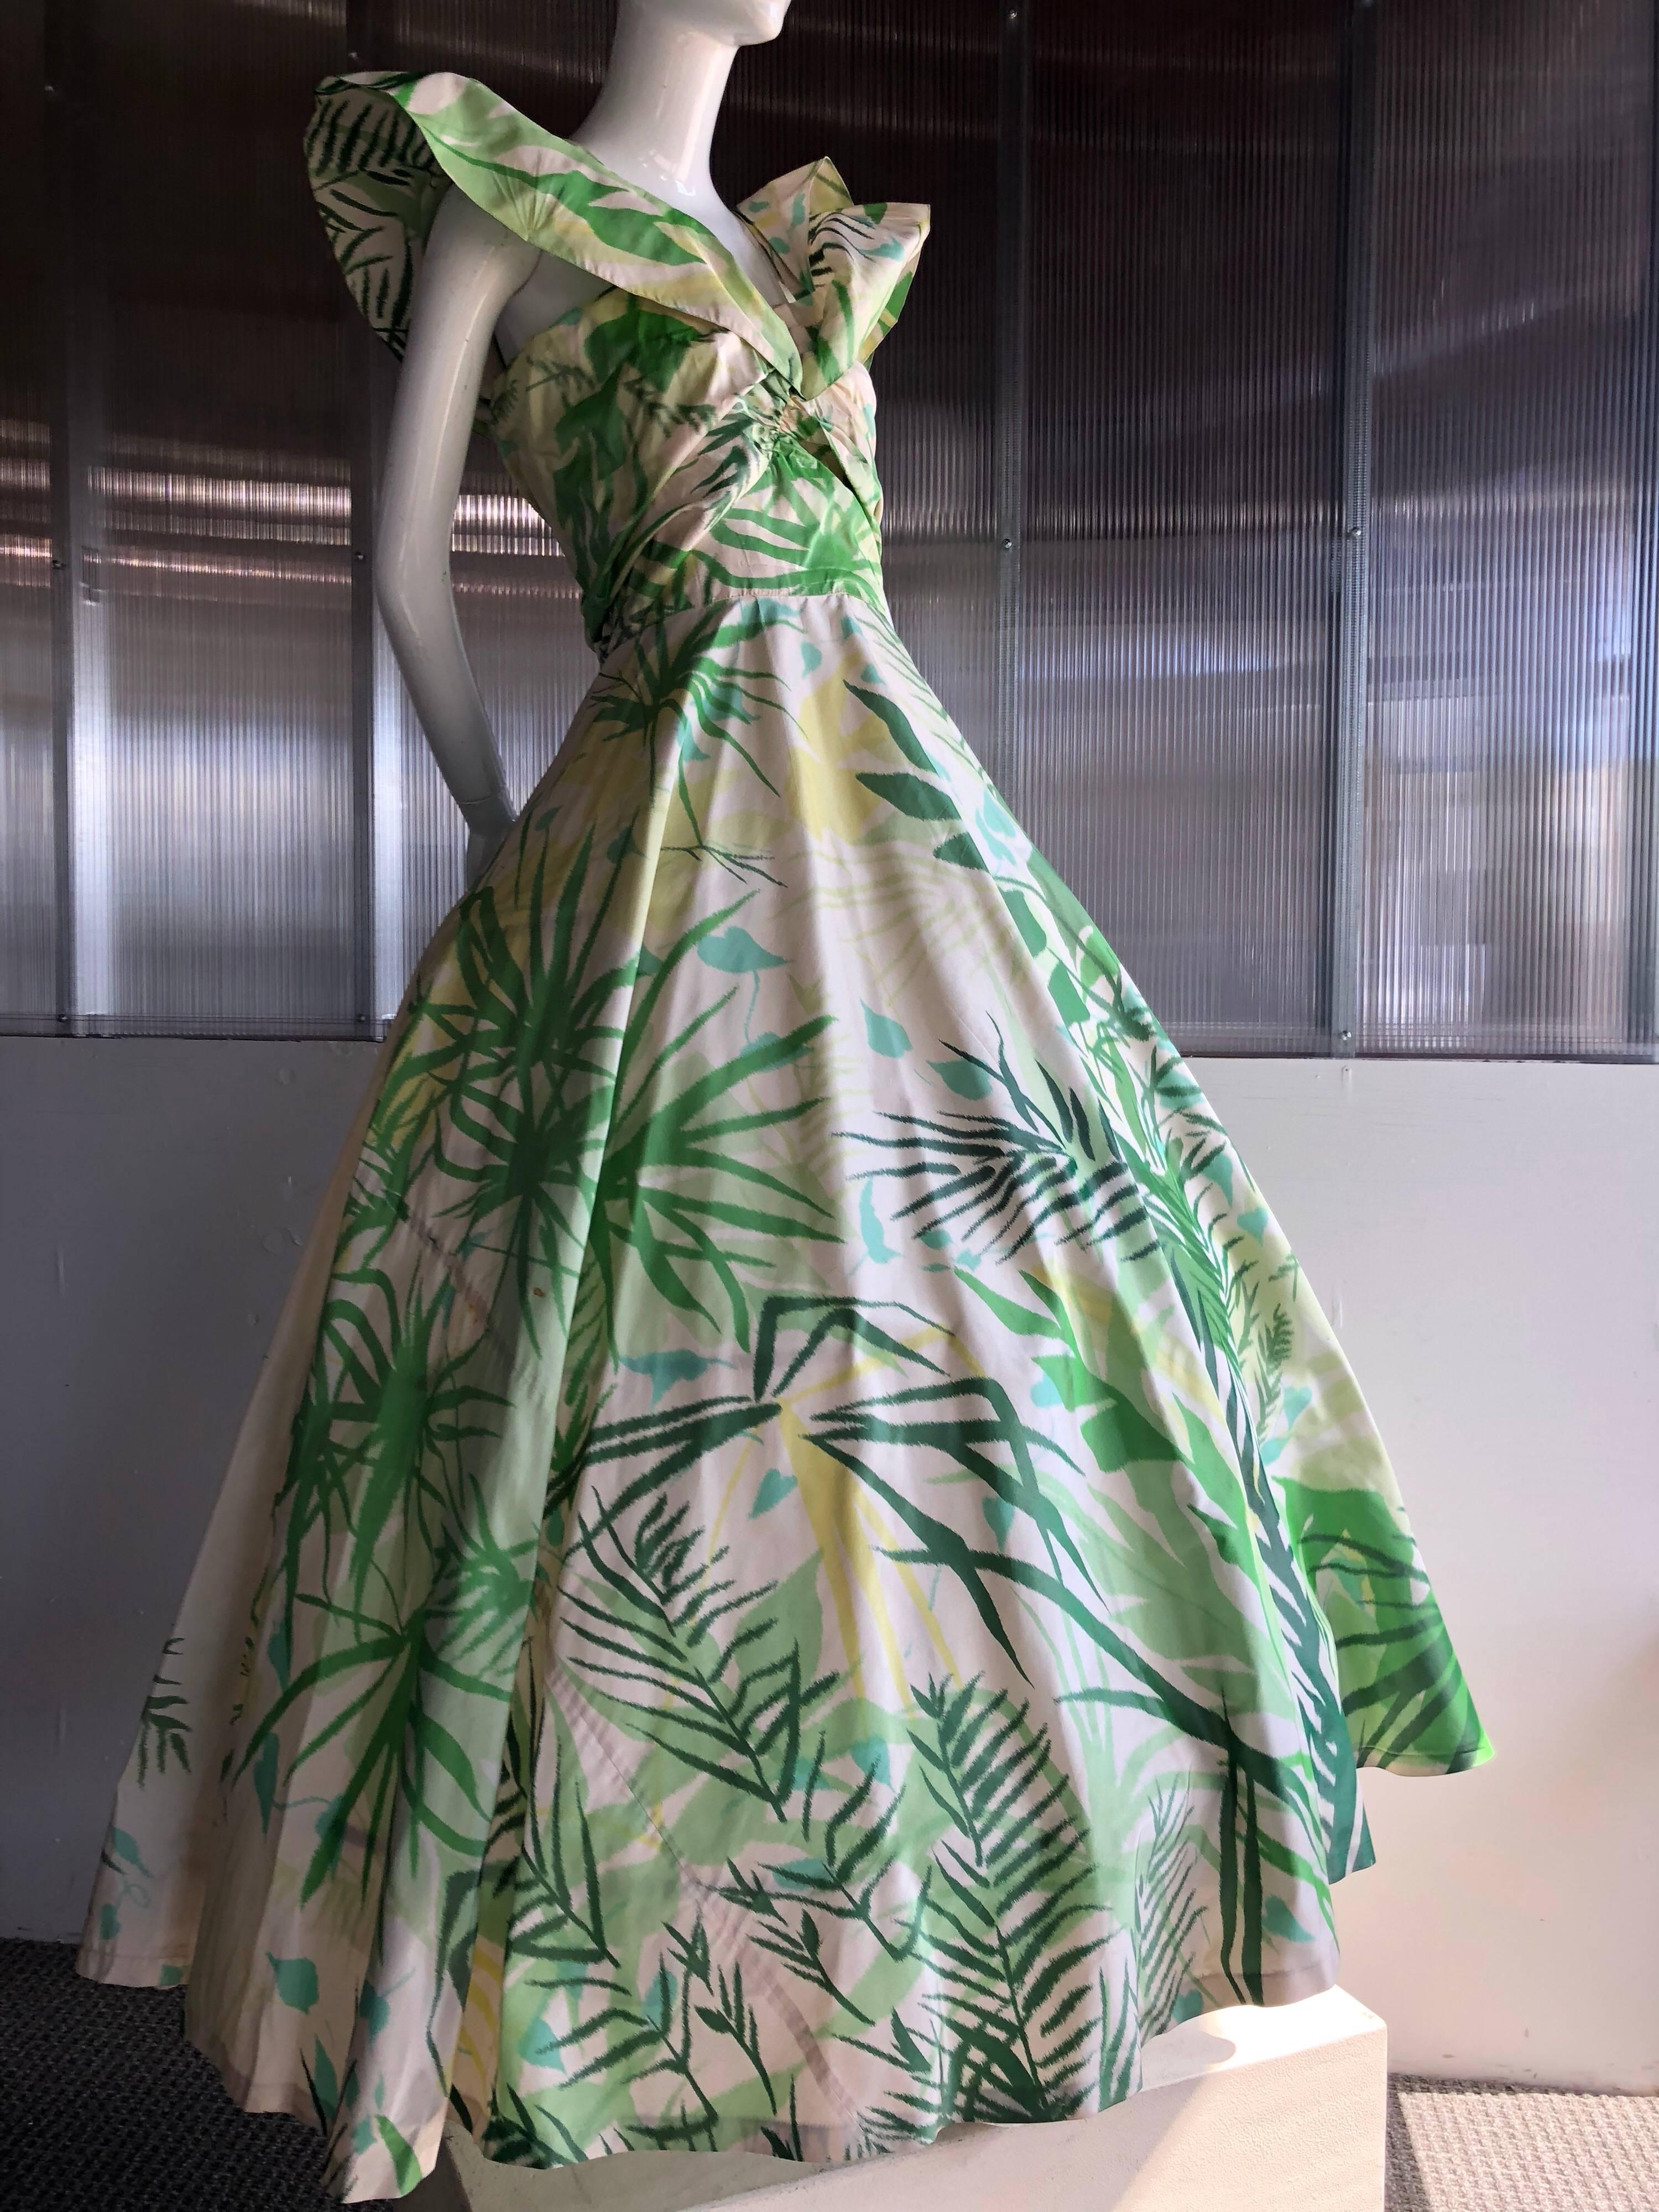 An incredible, rare 1952 Gilbert Adrian Original silk warp-printed taffeta gown in tropical leaf and palm frond motifs. Very, very full skirt, fitted, ruched bodice and spectacular wing-like shoulder ruffles. Bodice is boned. Back zipper.